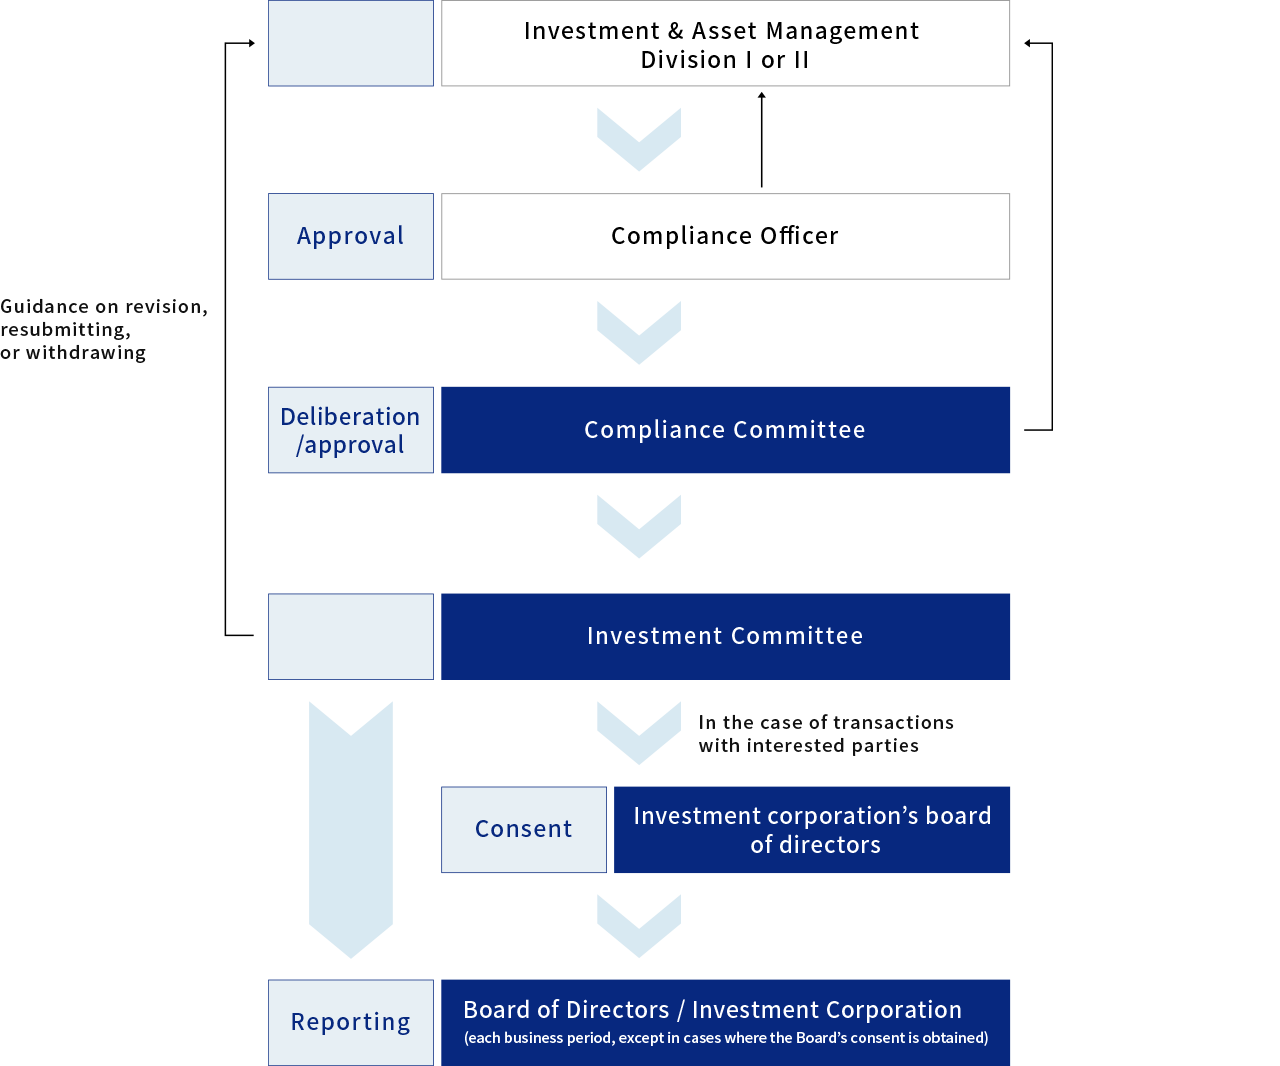 Mizuho REIT Management’s Decision-Making Process for Its Investment Management